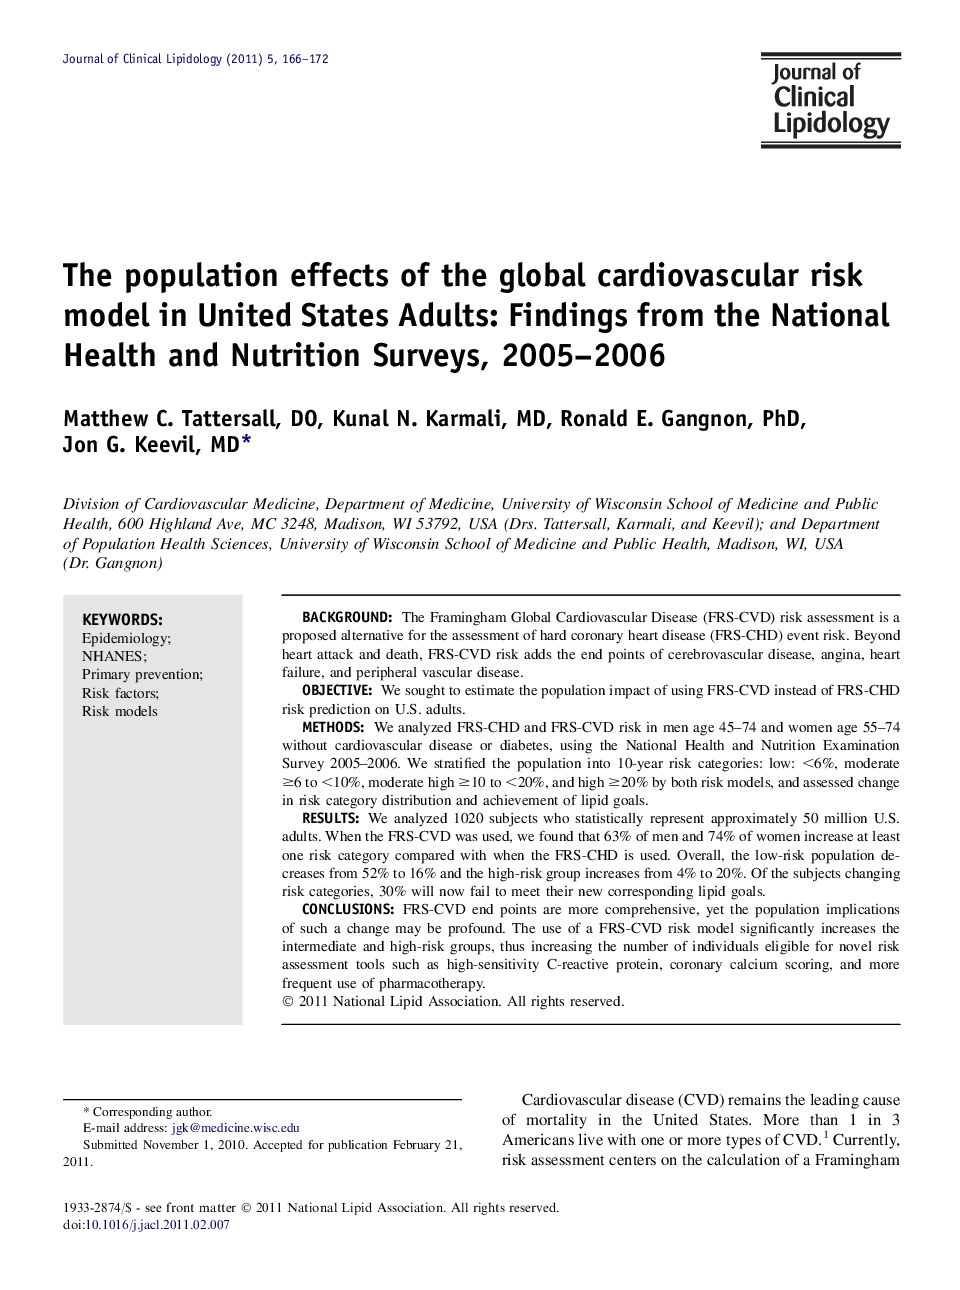 The population effects of the global cardiovascular risk model in United States Adults: Findings from the National Health and Nutrition Surveys, 2005–2006